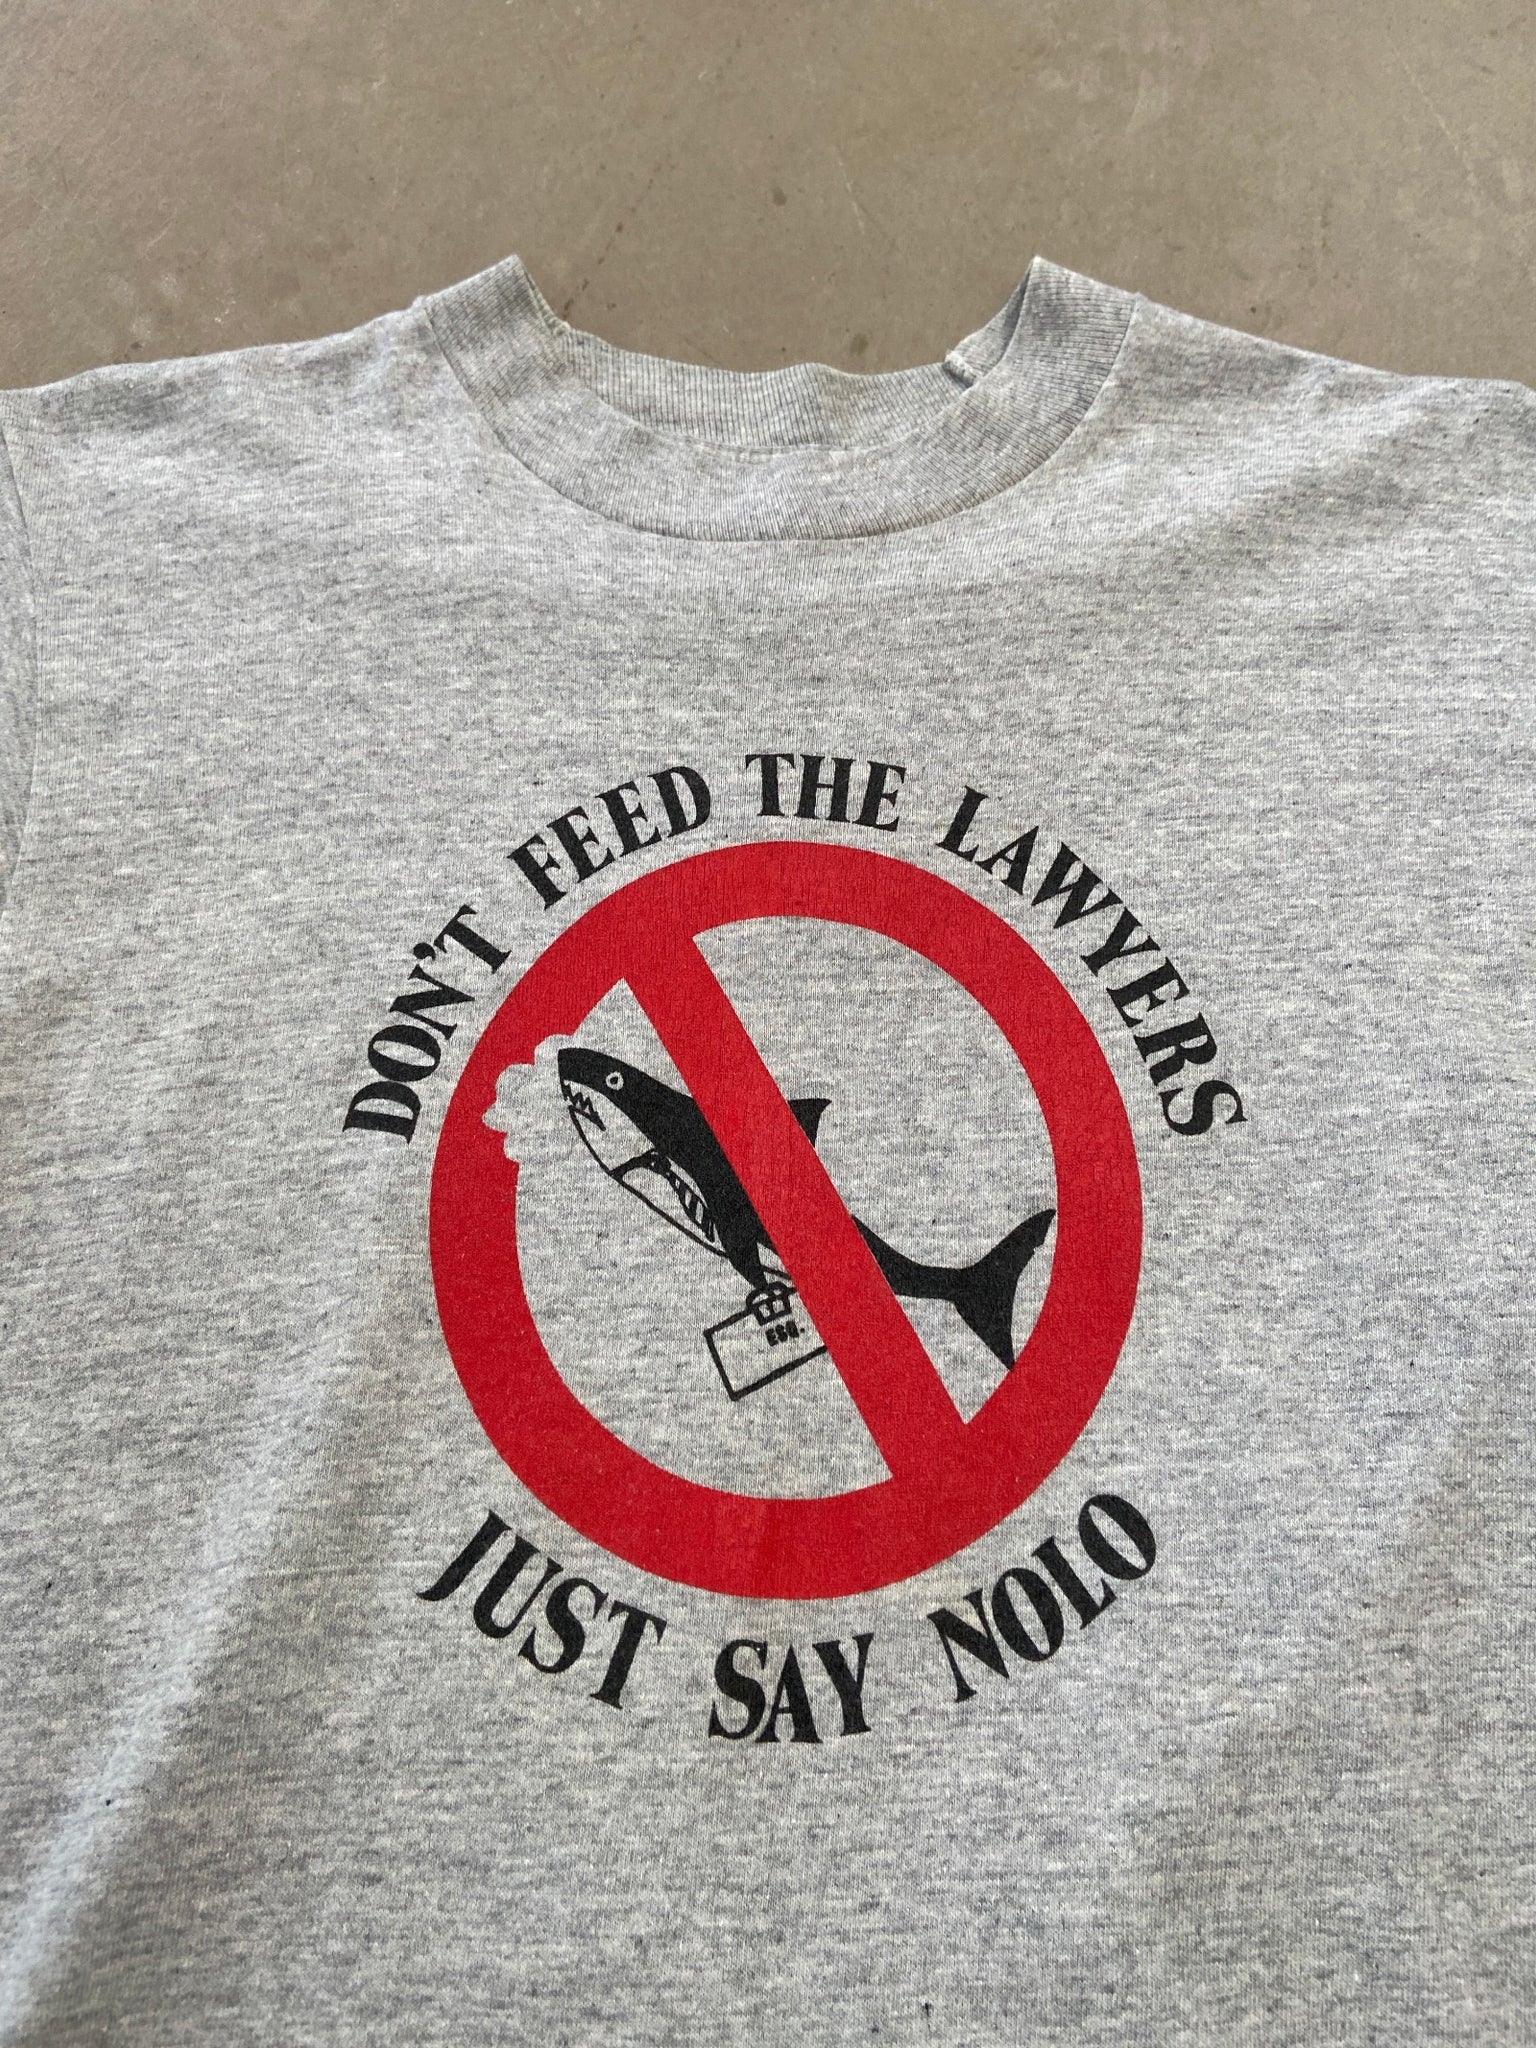 Don't Feed The Lawyers T-Shirt - S